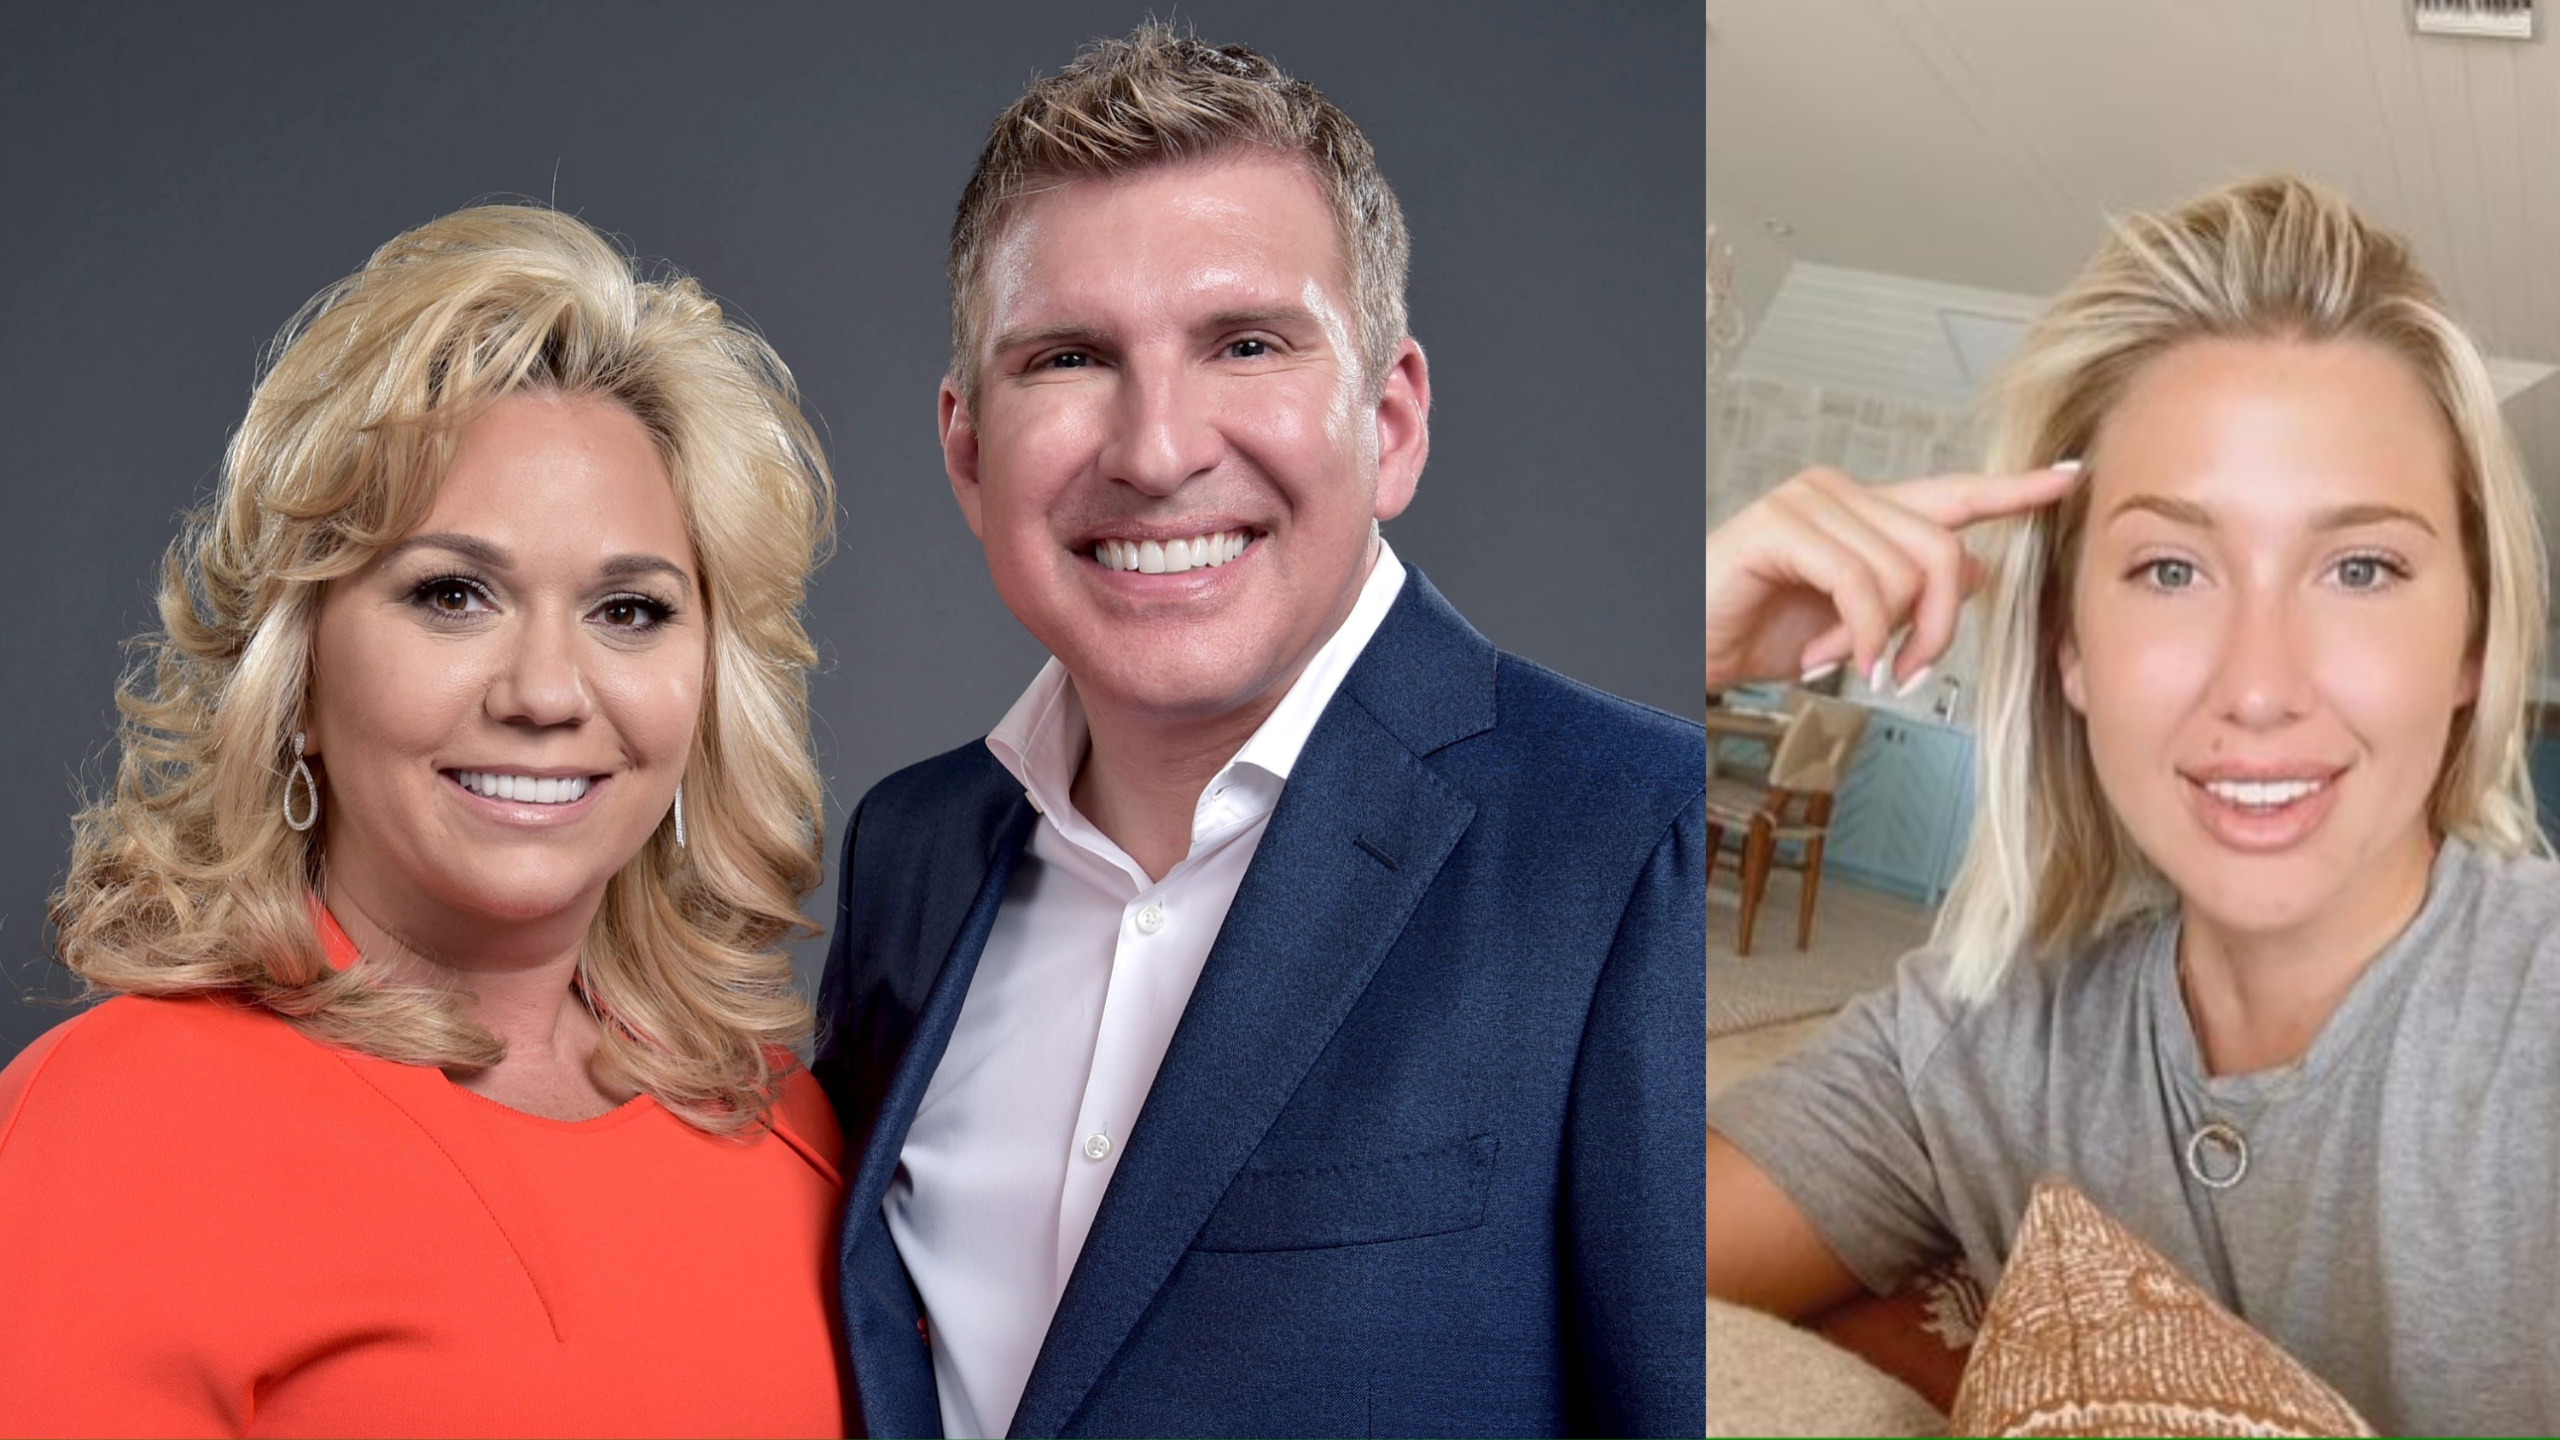 Savaanah Chrisley sobs on the update on her parents Todd and Julie Chrisley oral argument.